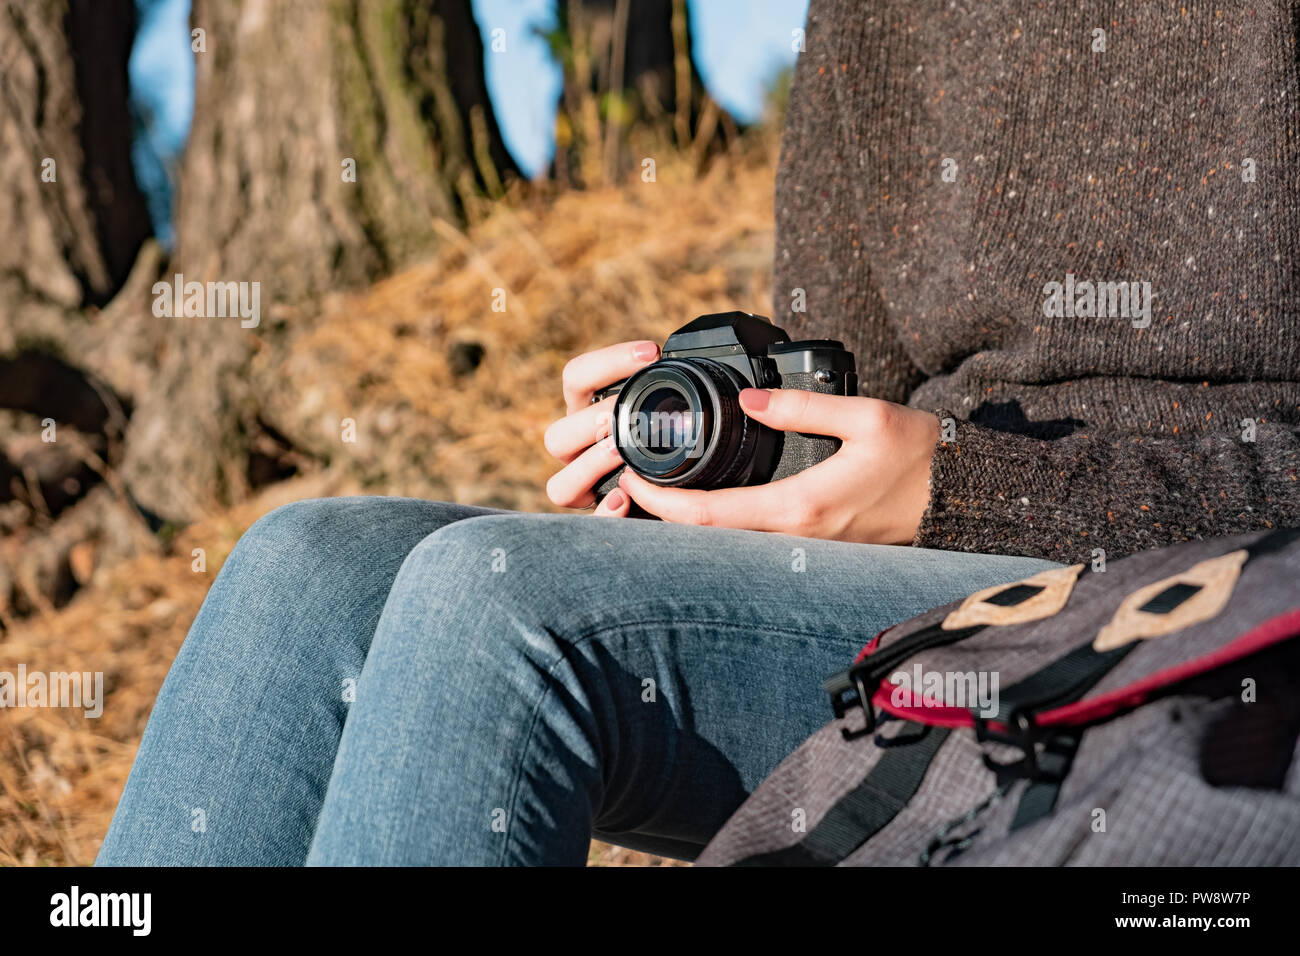 Vintage film camera in female hands. Close up shot of a woman holding film camera outdoors Stock Photo